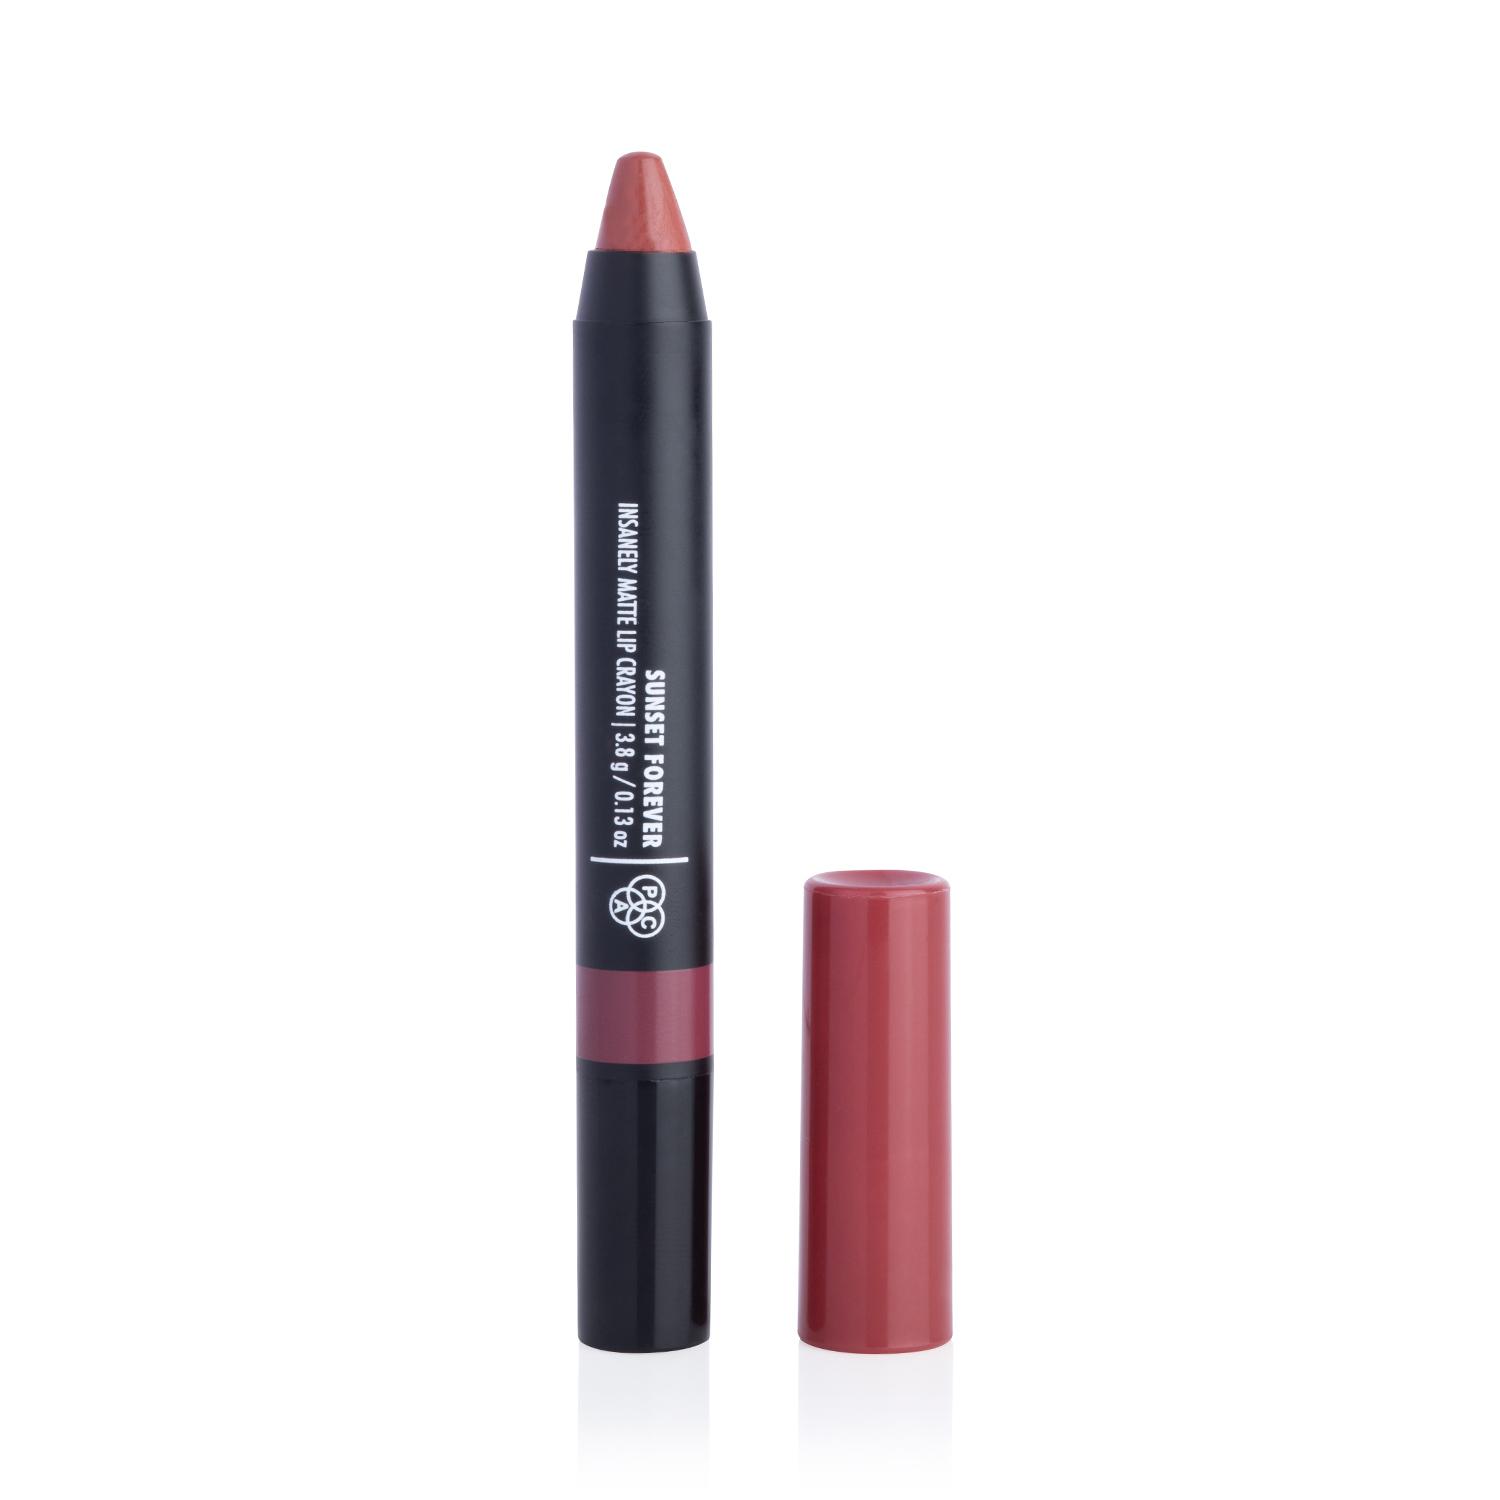 PAC | PAC Insanely Matte Lip Crayon - Sunset Forever (3.8g)